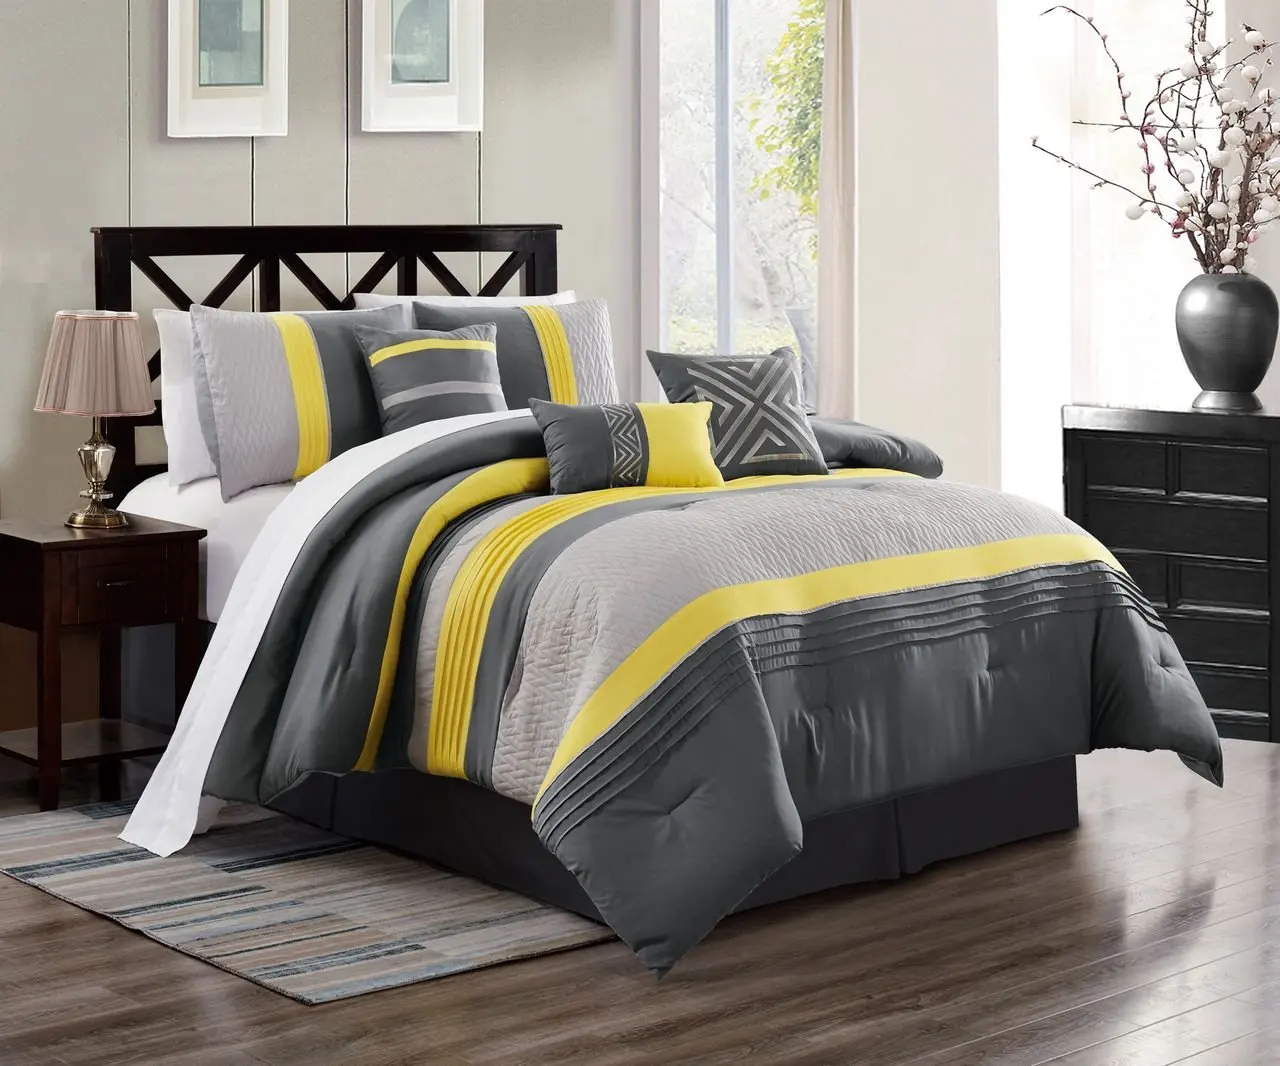 Cheap Yellow And Gray Comforter, find Yellow And Gray Comforter deals